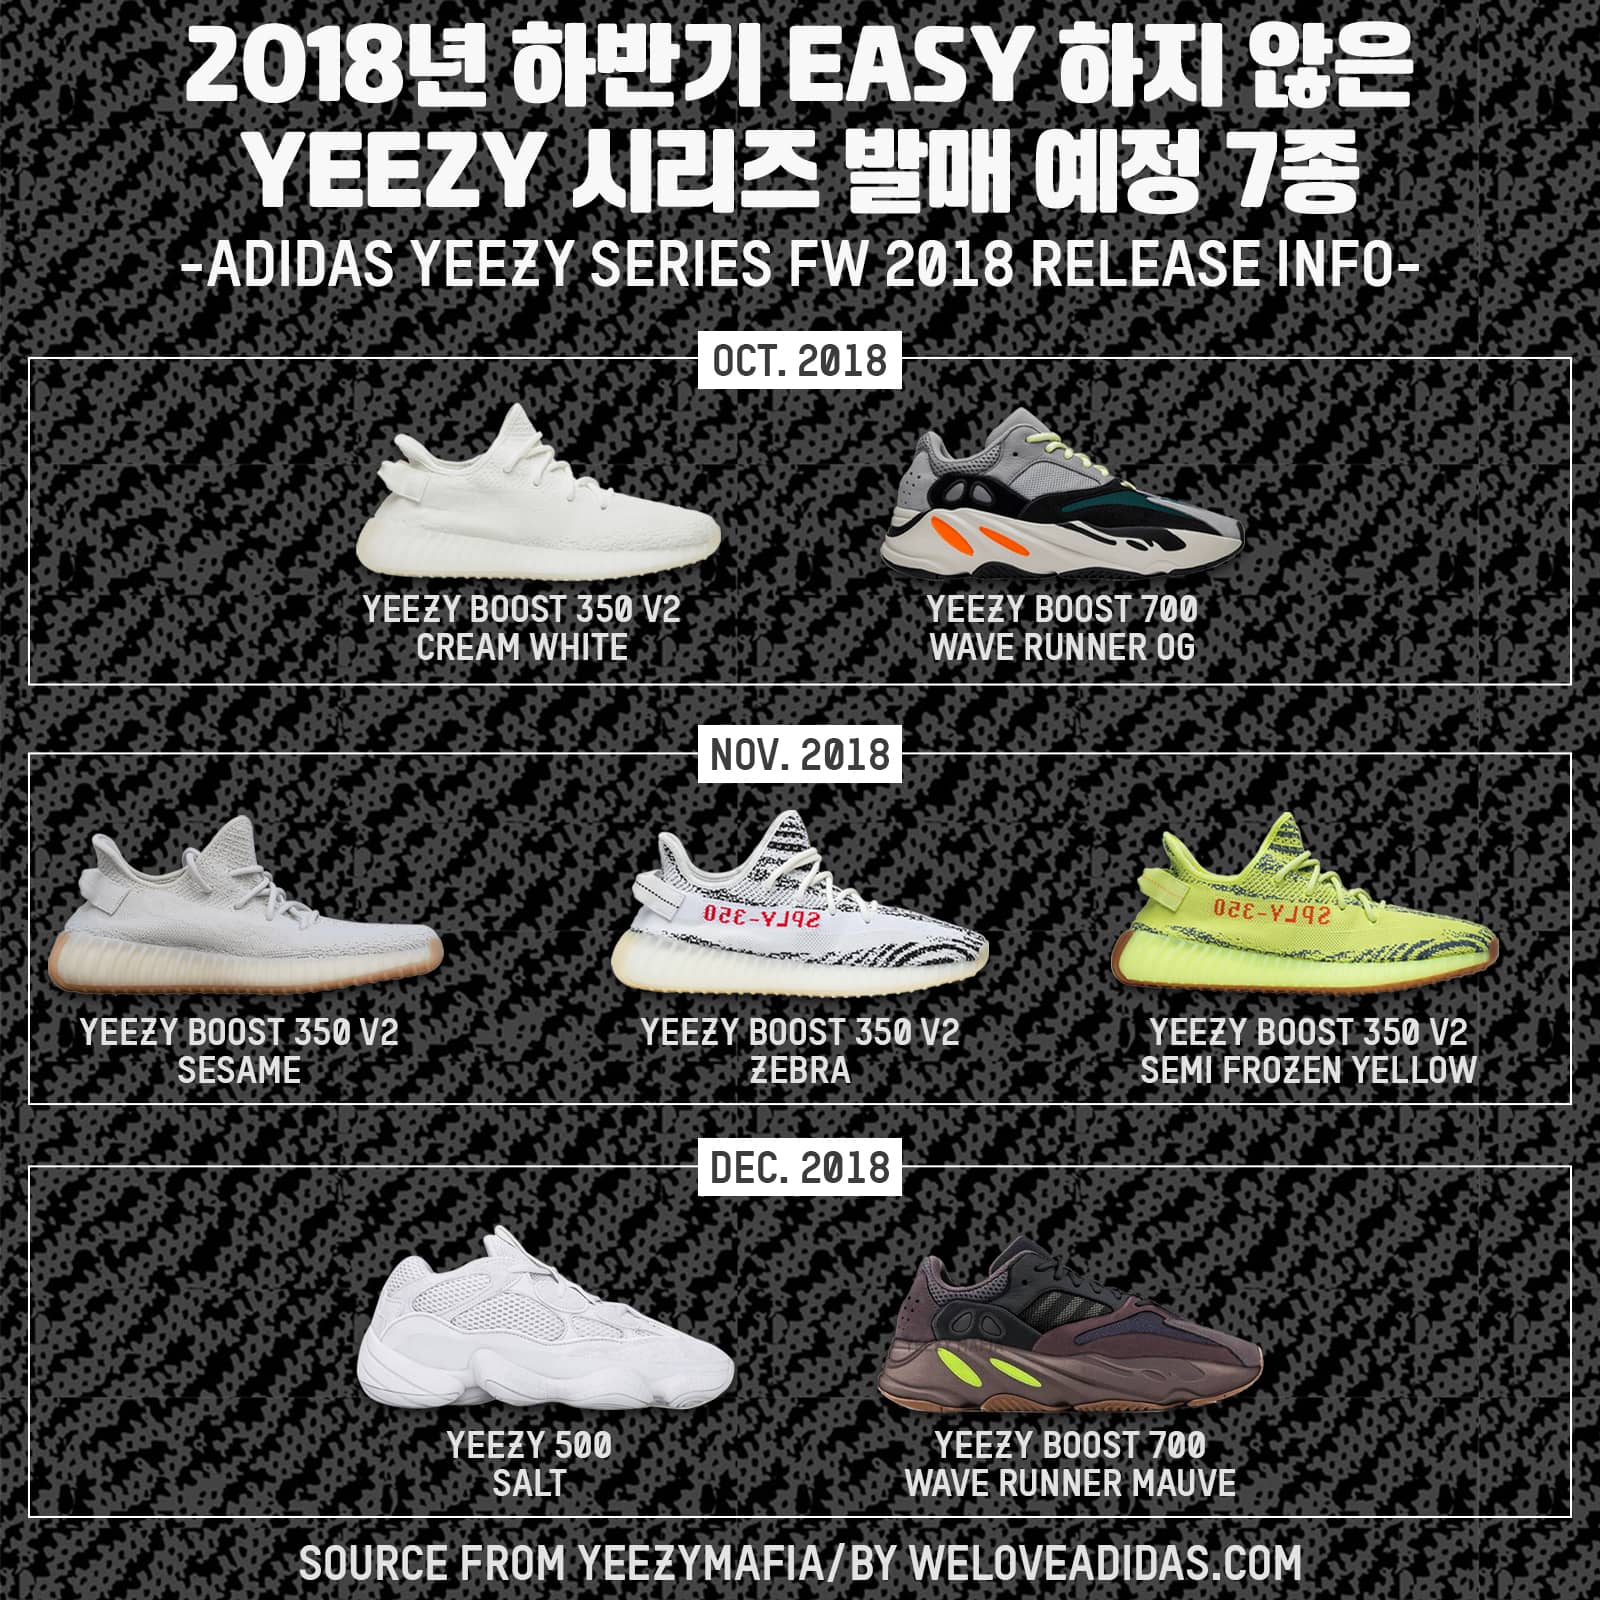 adidas YEEZY FW 2018 release info by weloveadidas